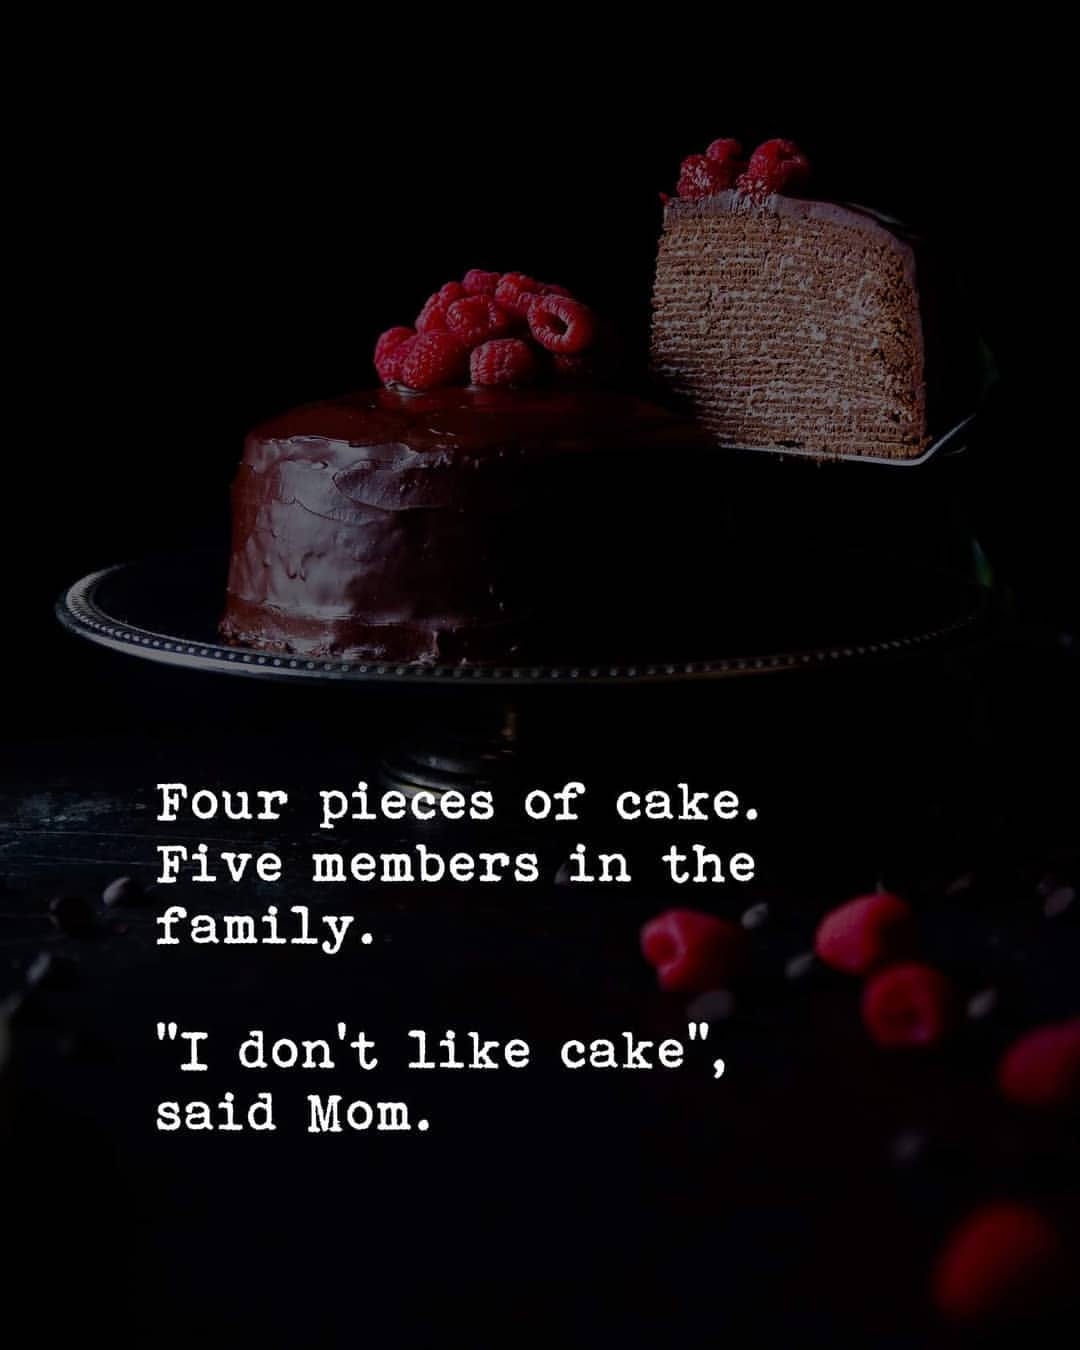 Four pieces of cake. Five members family. "I don't like said Mom. in the cake